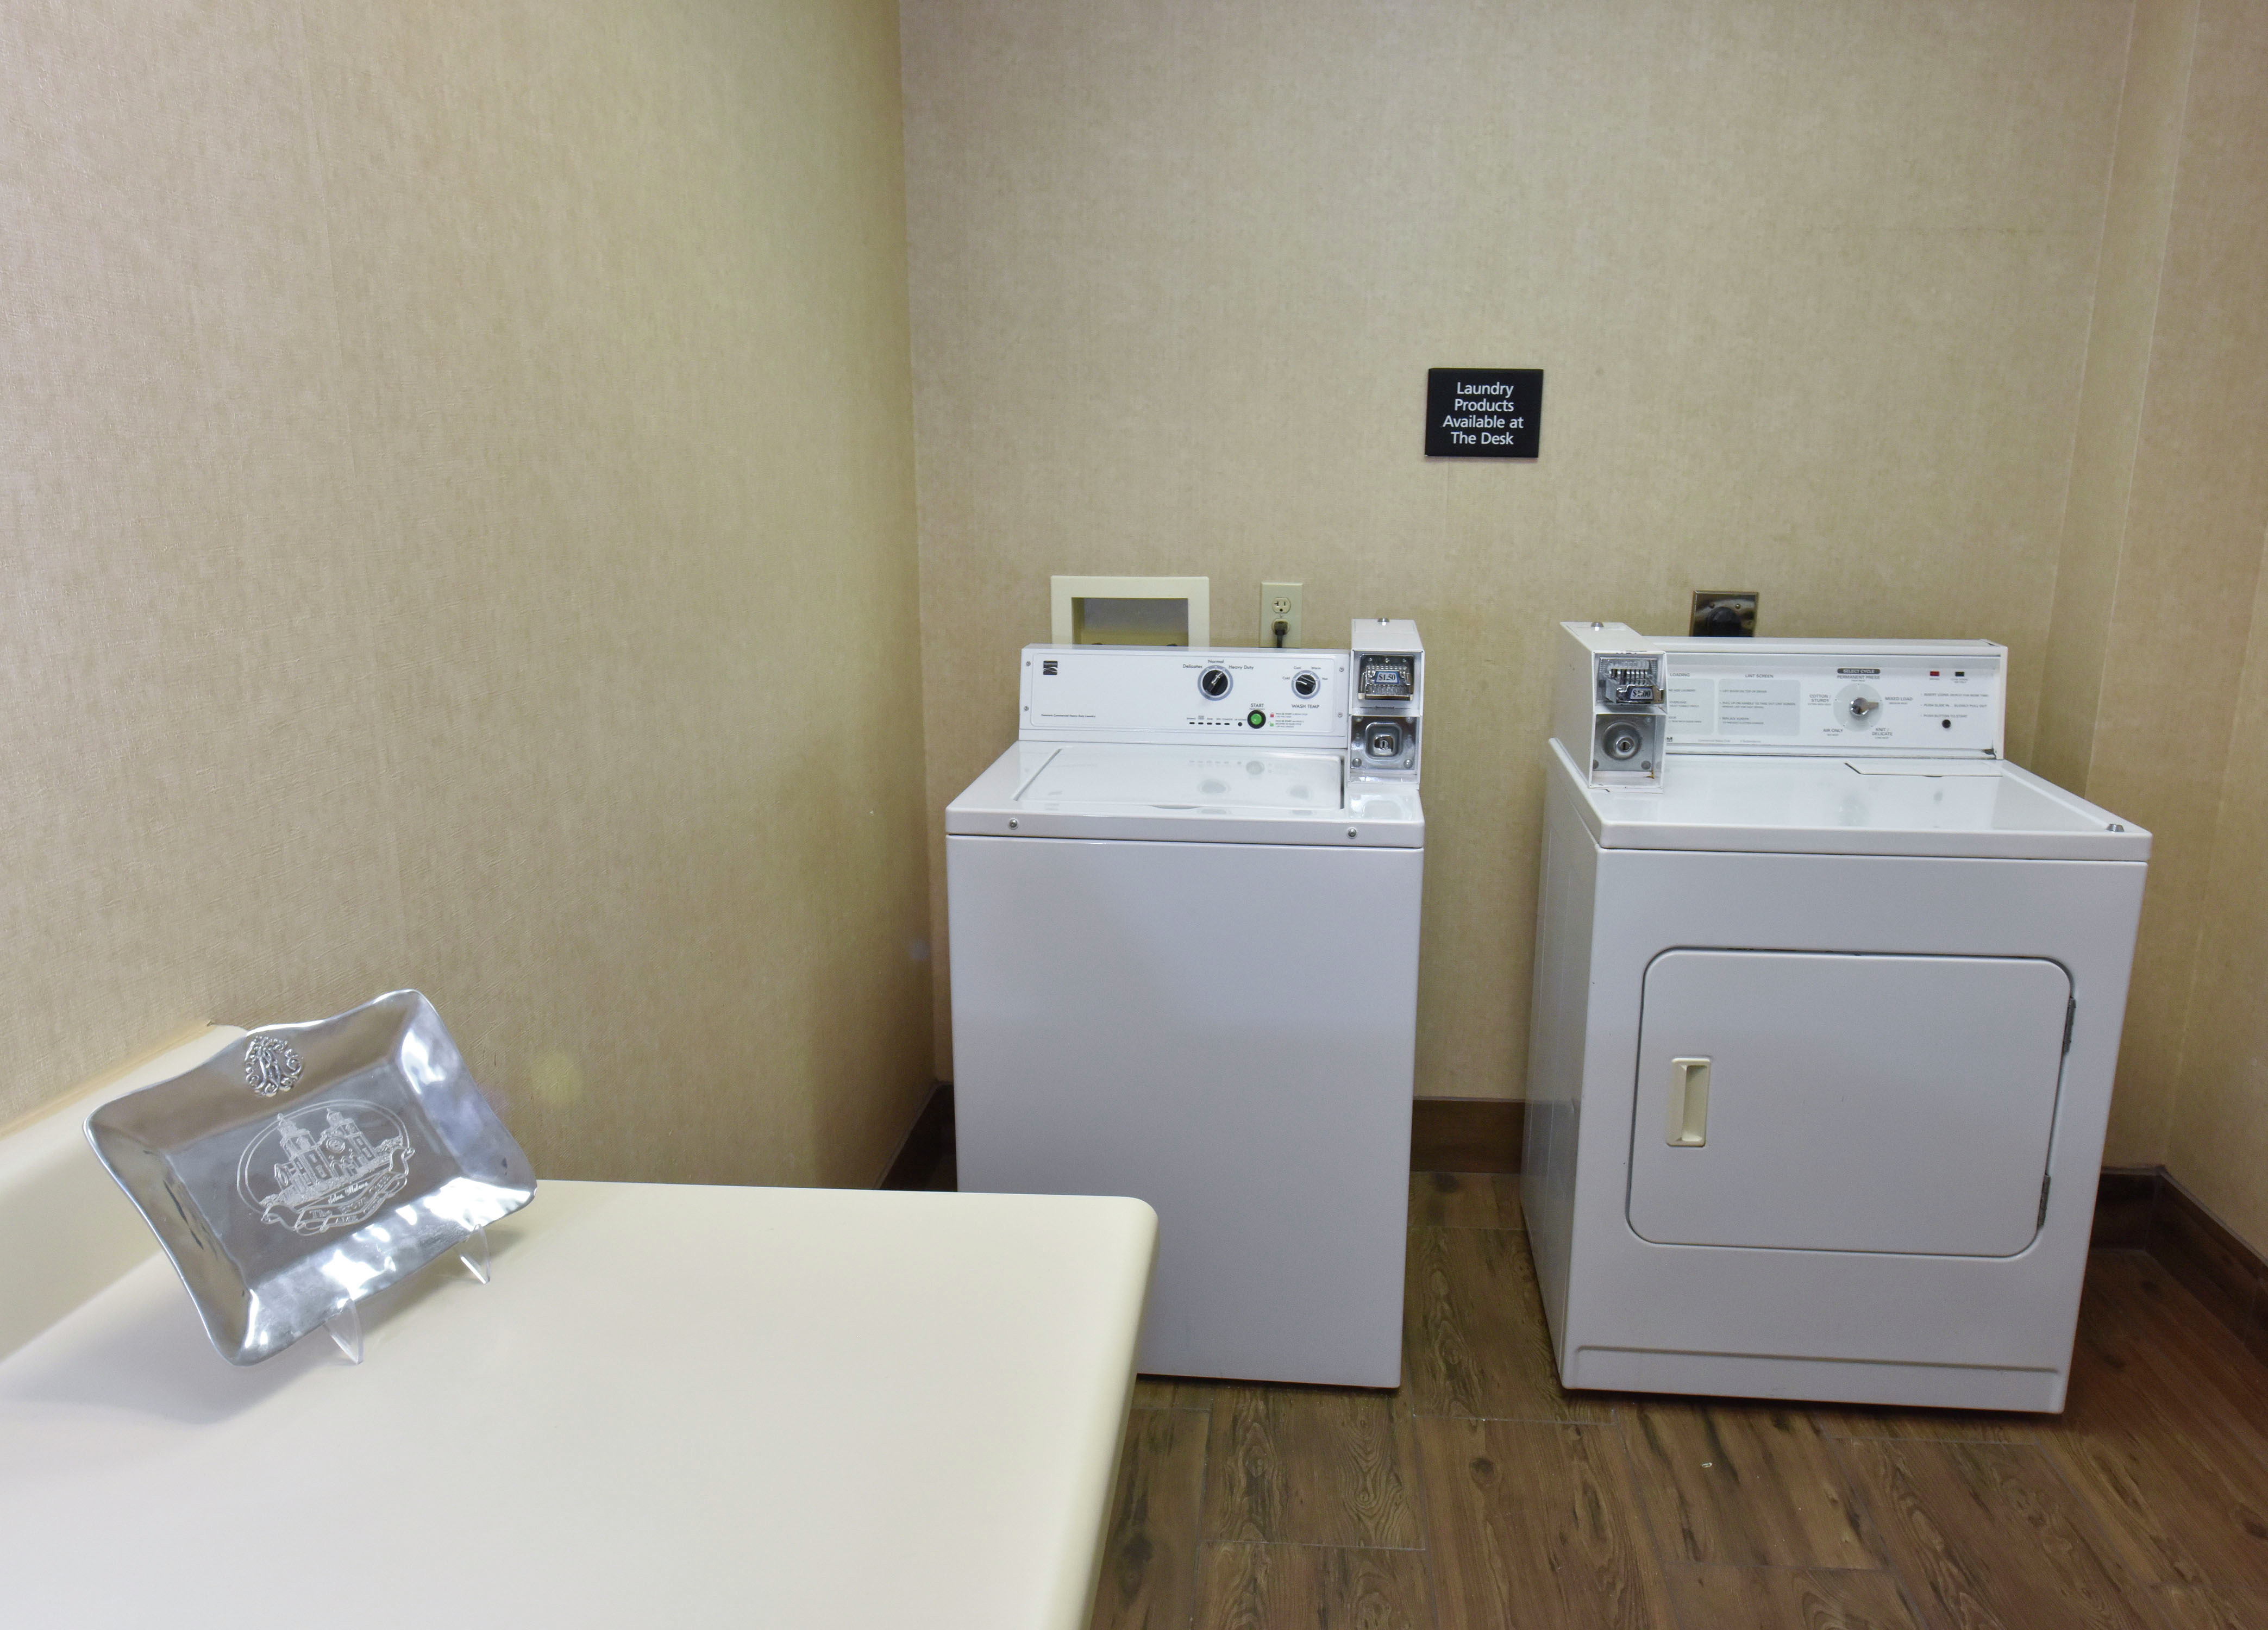 Guest Laundry Area with Washer and Dryer